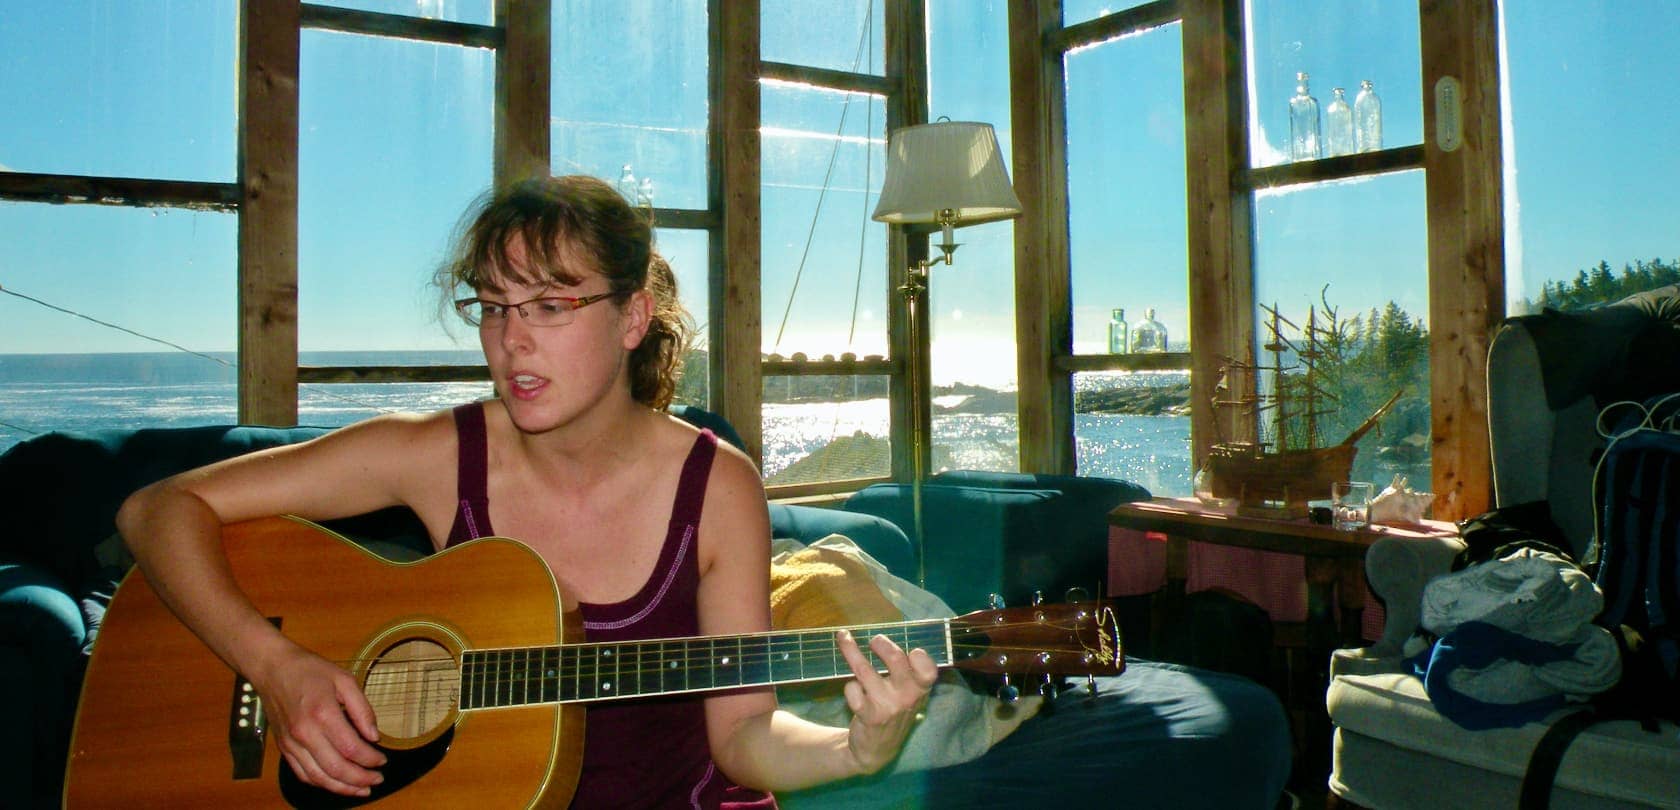 Woman playing acoustic guitar in glass window house